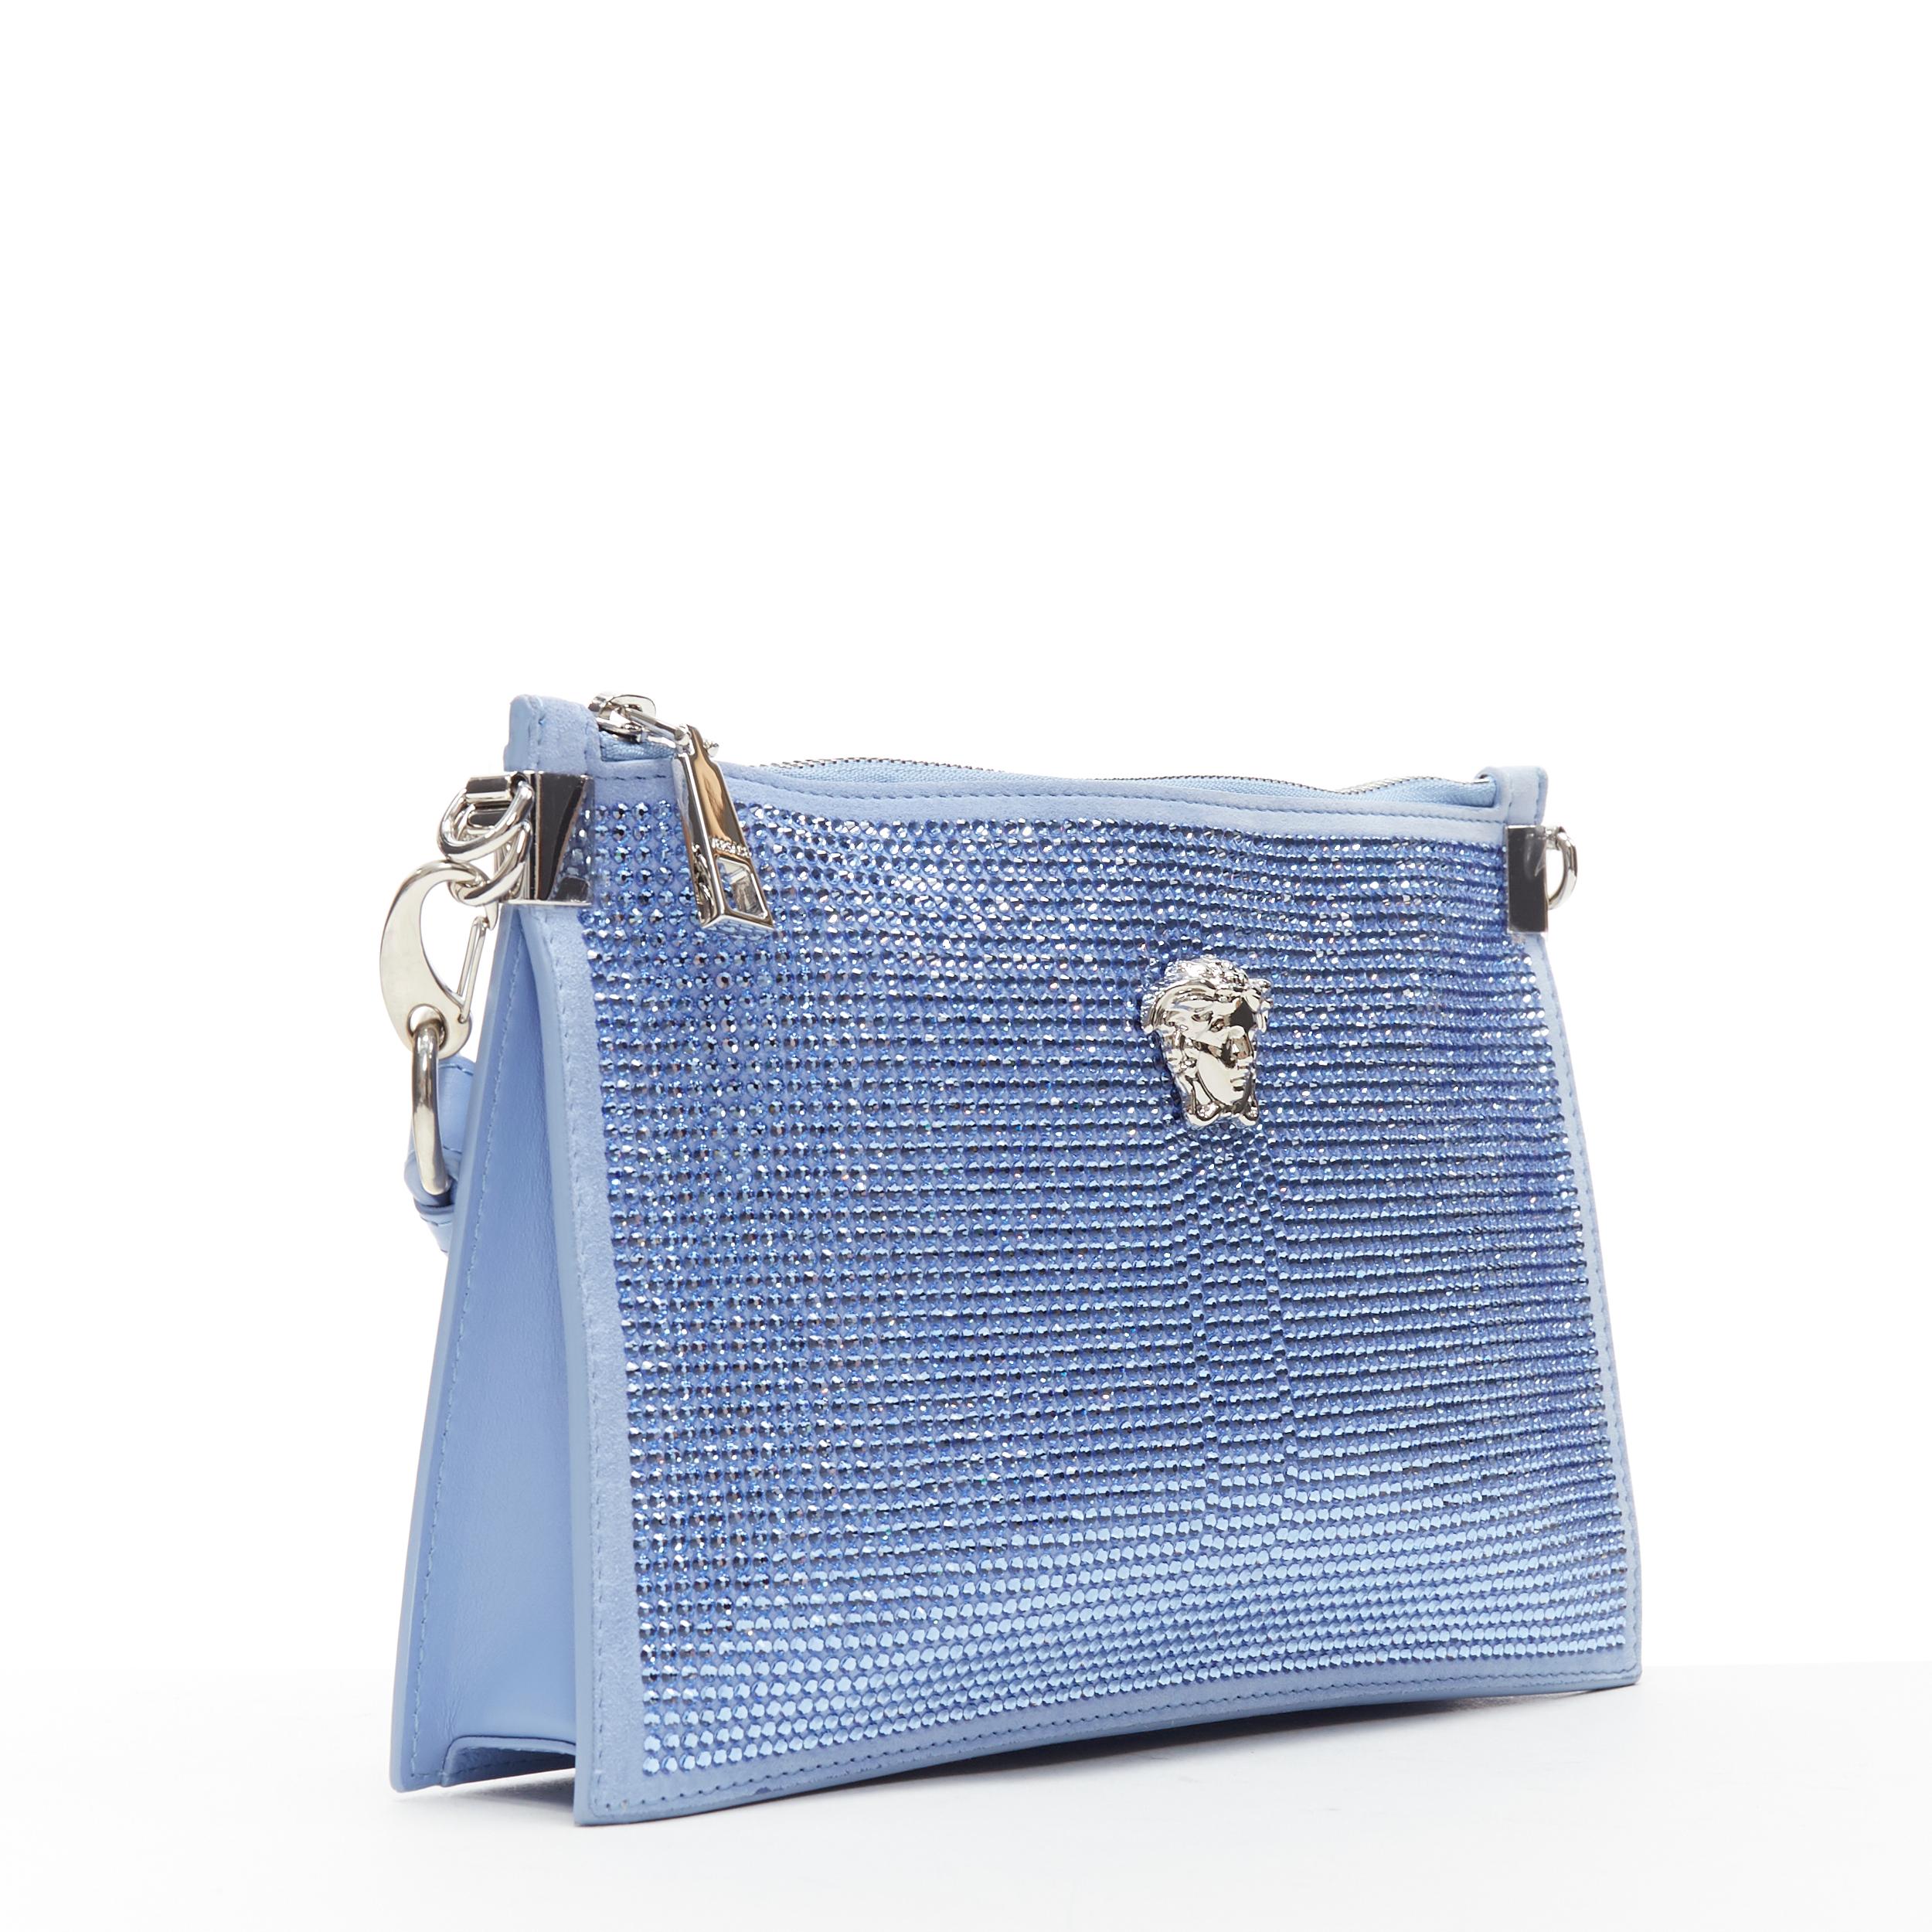 new VERSACE Palazzo Medusa blue crystal strass leather clutch crossbody bag
Brand: Versace
Designer: Donatella Versace
Model Name / Style: Crystal strass bag
Material: Leather
Color: Blue
Pattern: Solid
Closure: Zip
Extra Detail: Palazzo Medusa